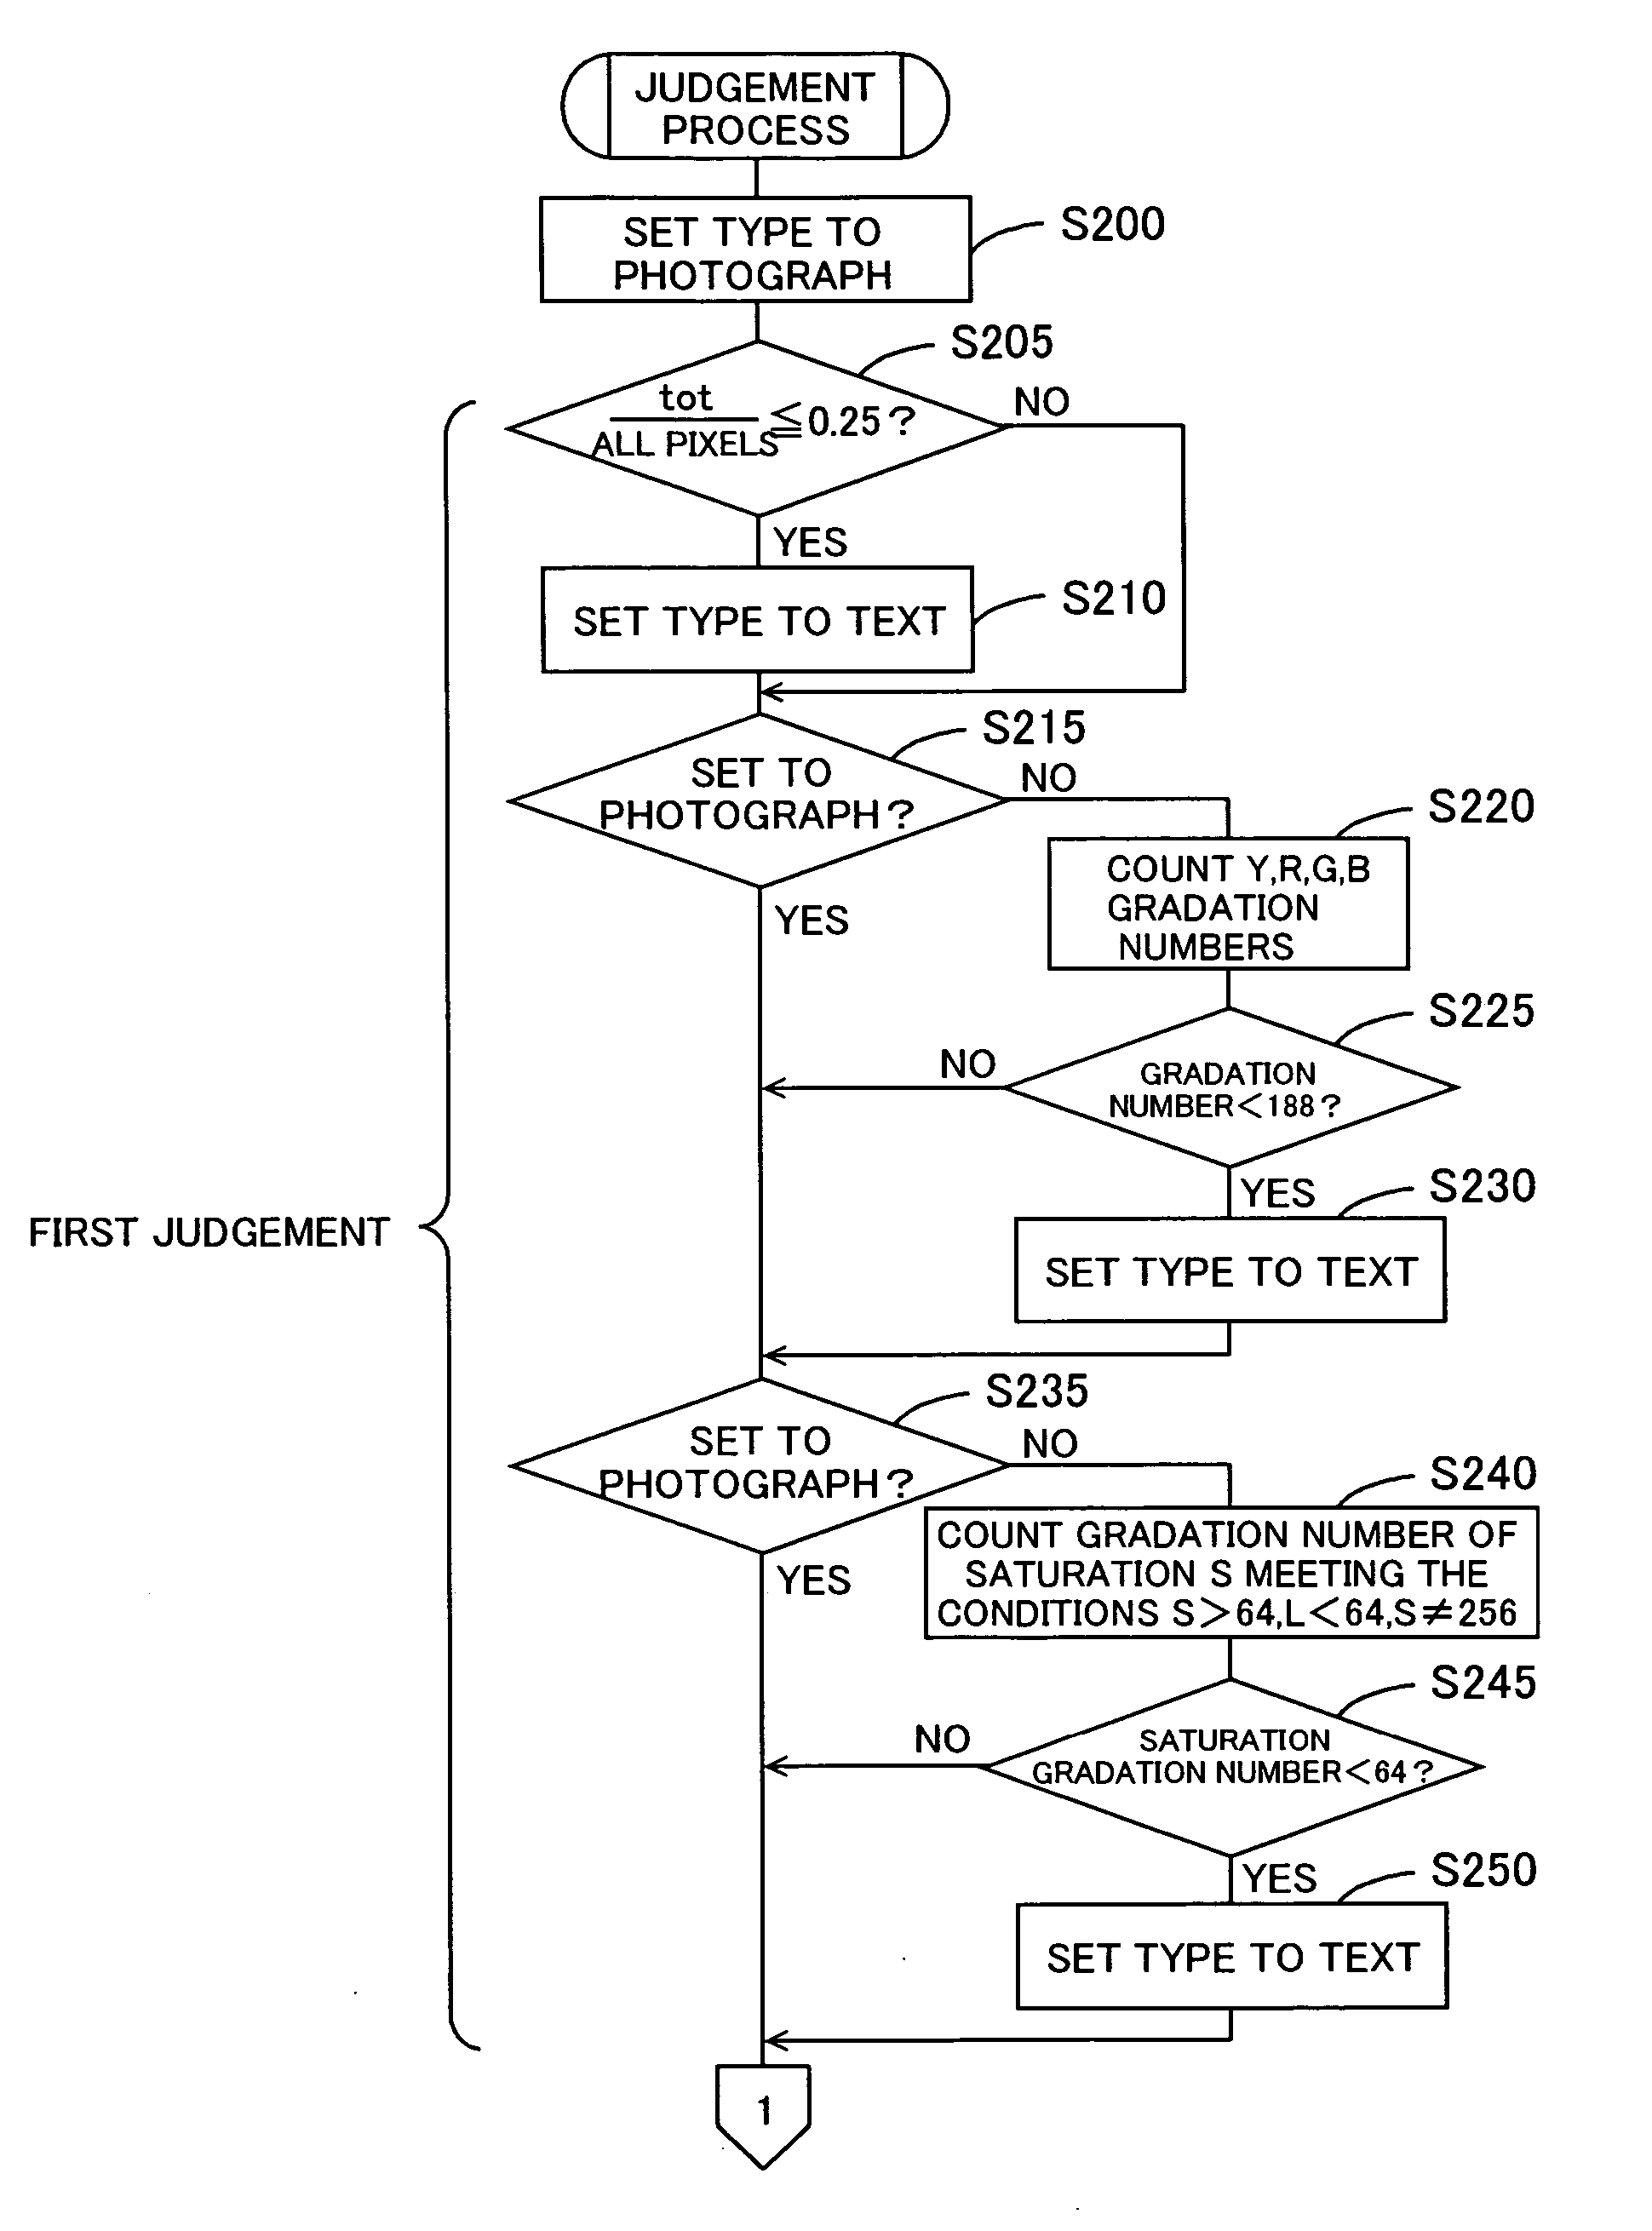 Control of image scanning device